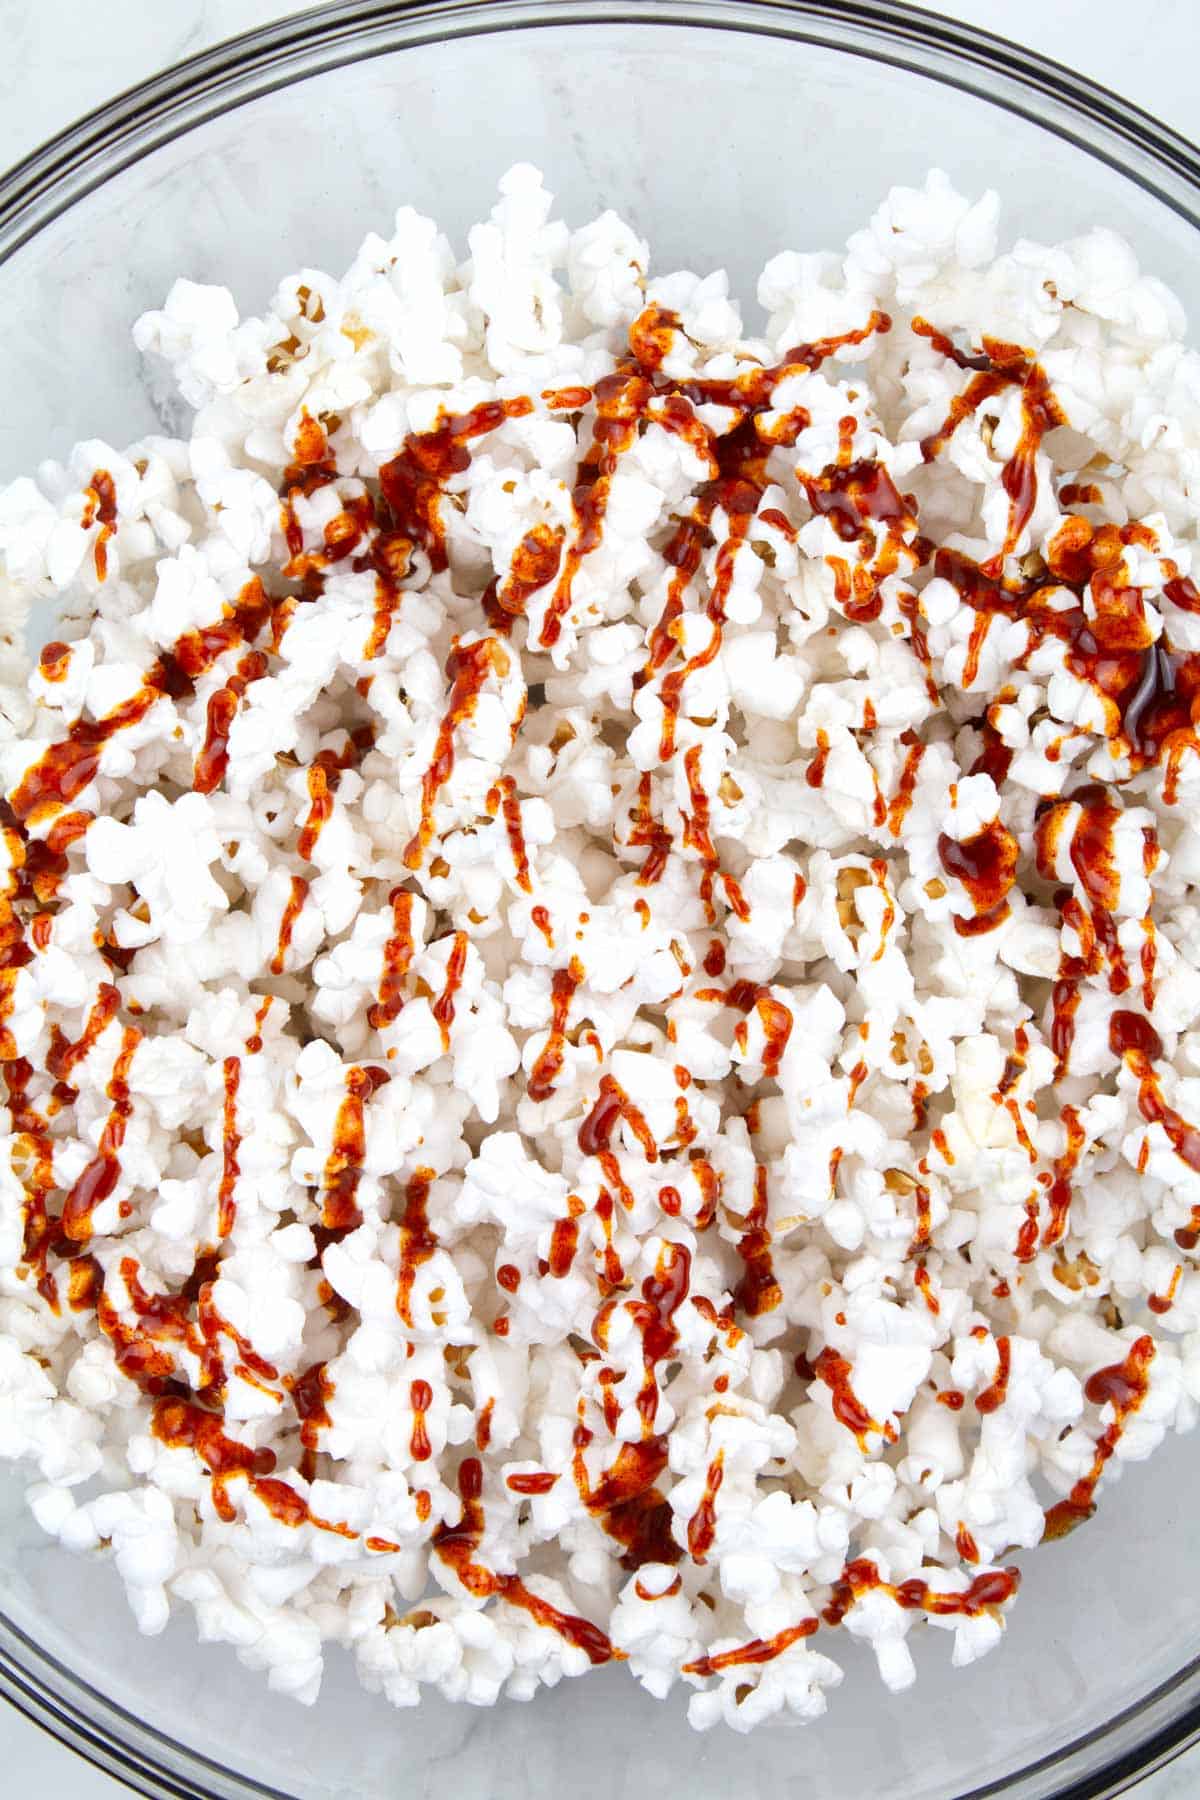 Popped popcorn in a bowl drizzled with red hot honey sauce before mixing together.